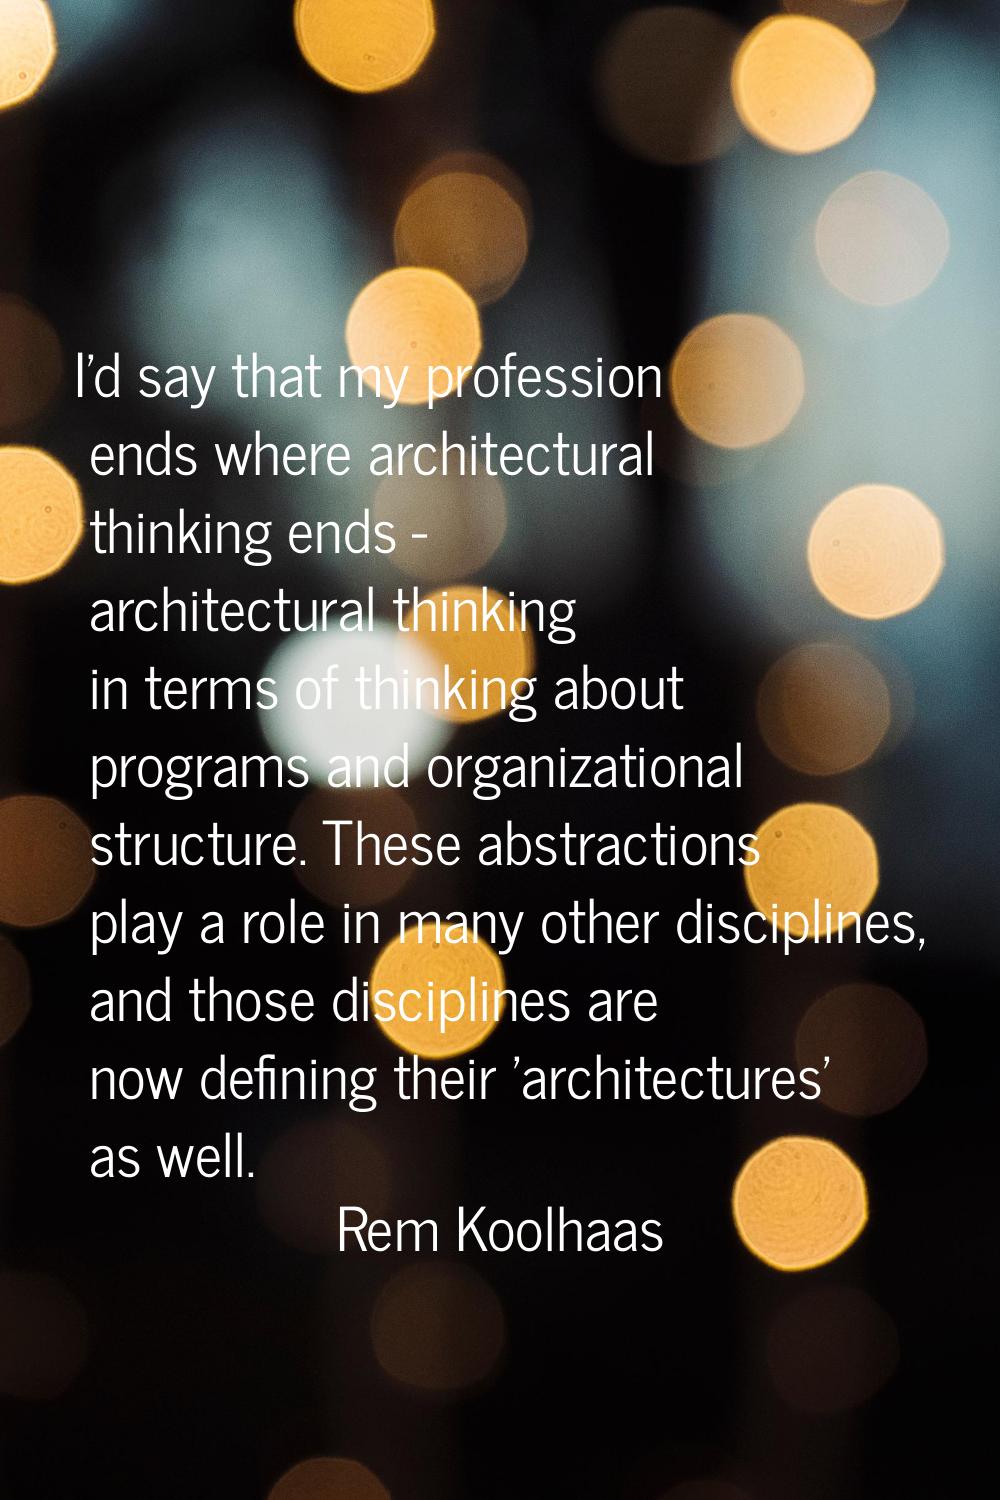 I'd say that my profession ends where architectural thinking ends - architectural thinking in terms